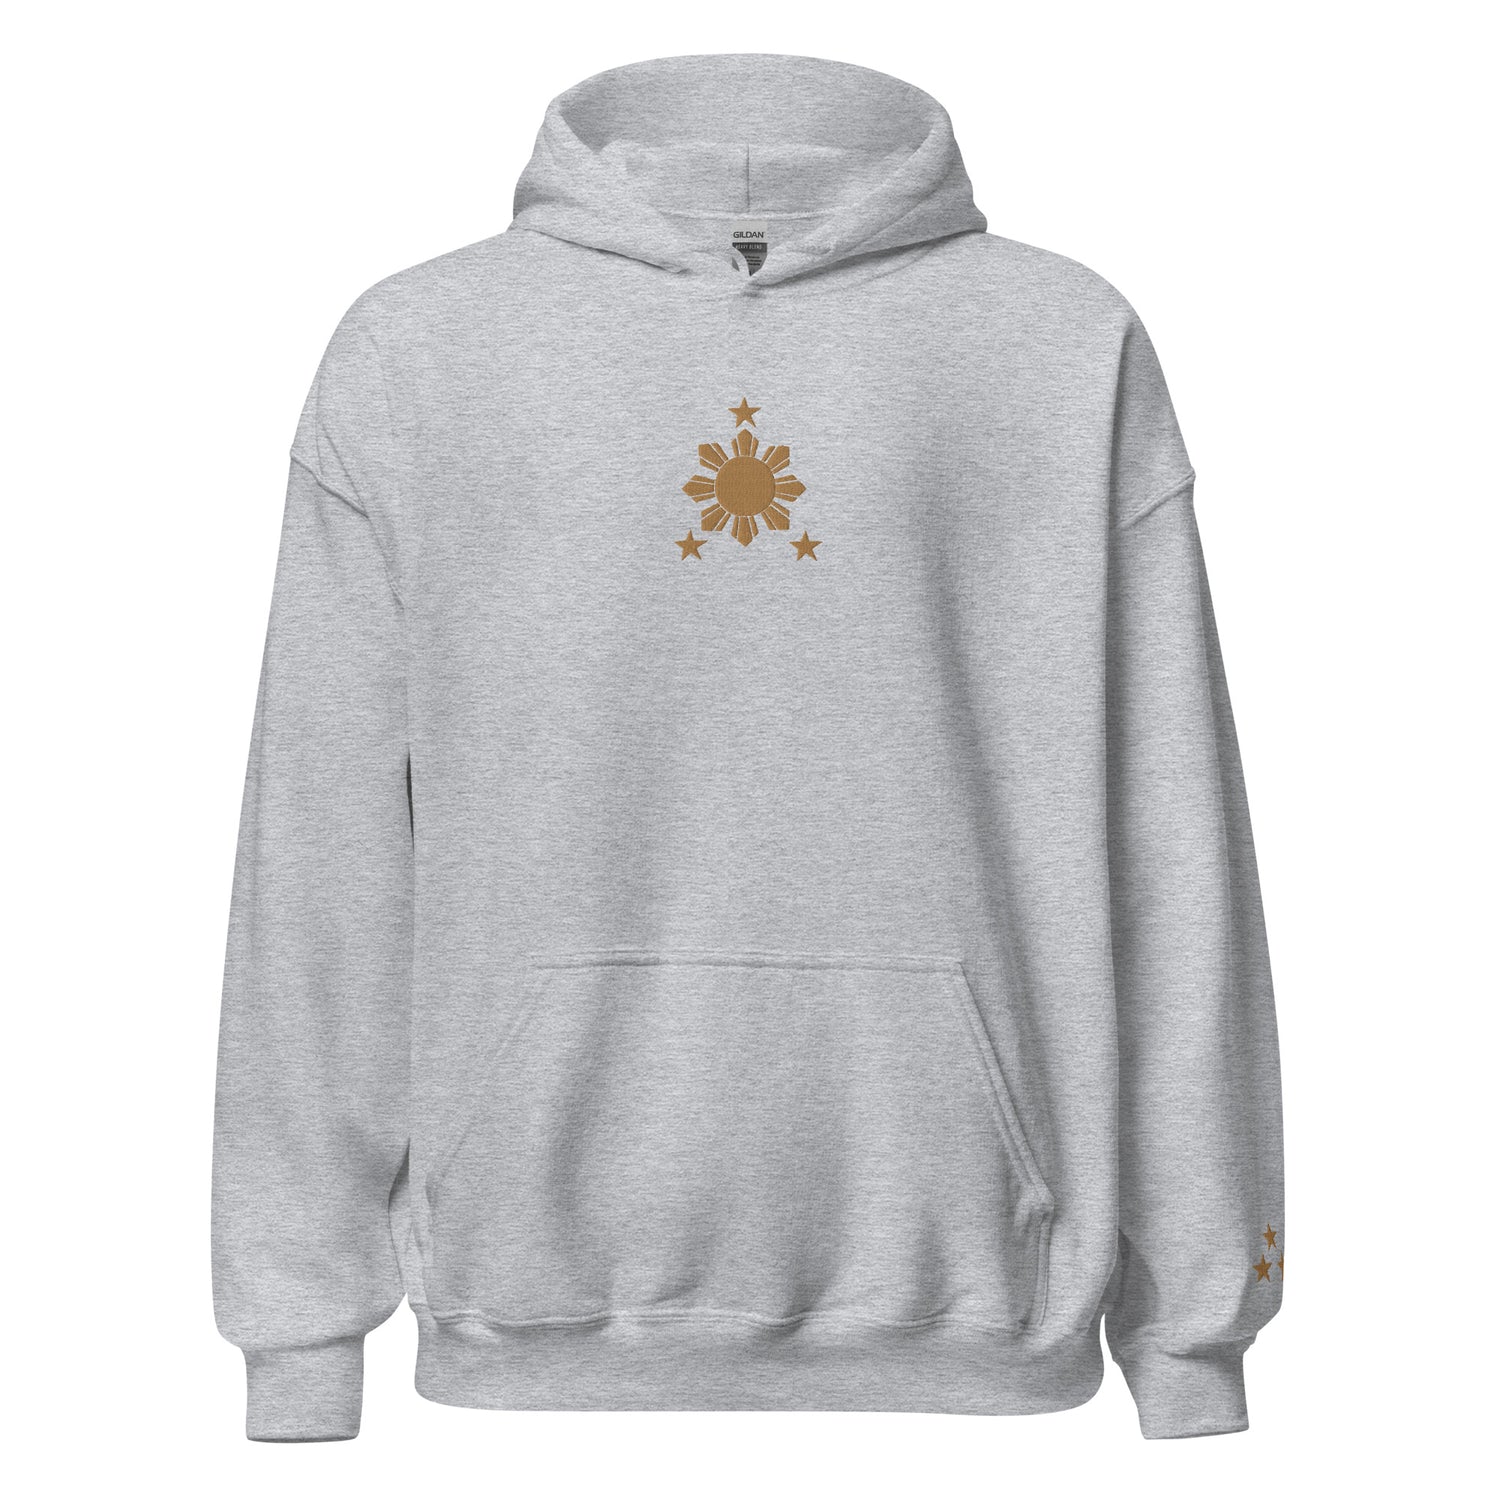 Filipino Hoodie Stars and Sun Embroidered Merch in color variant Gray